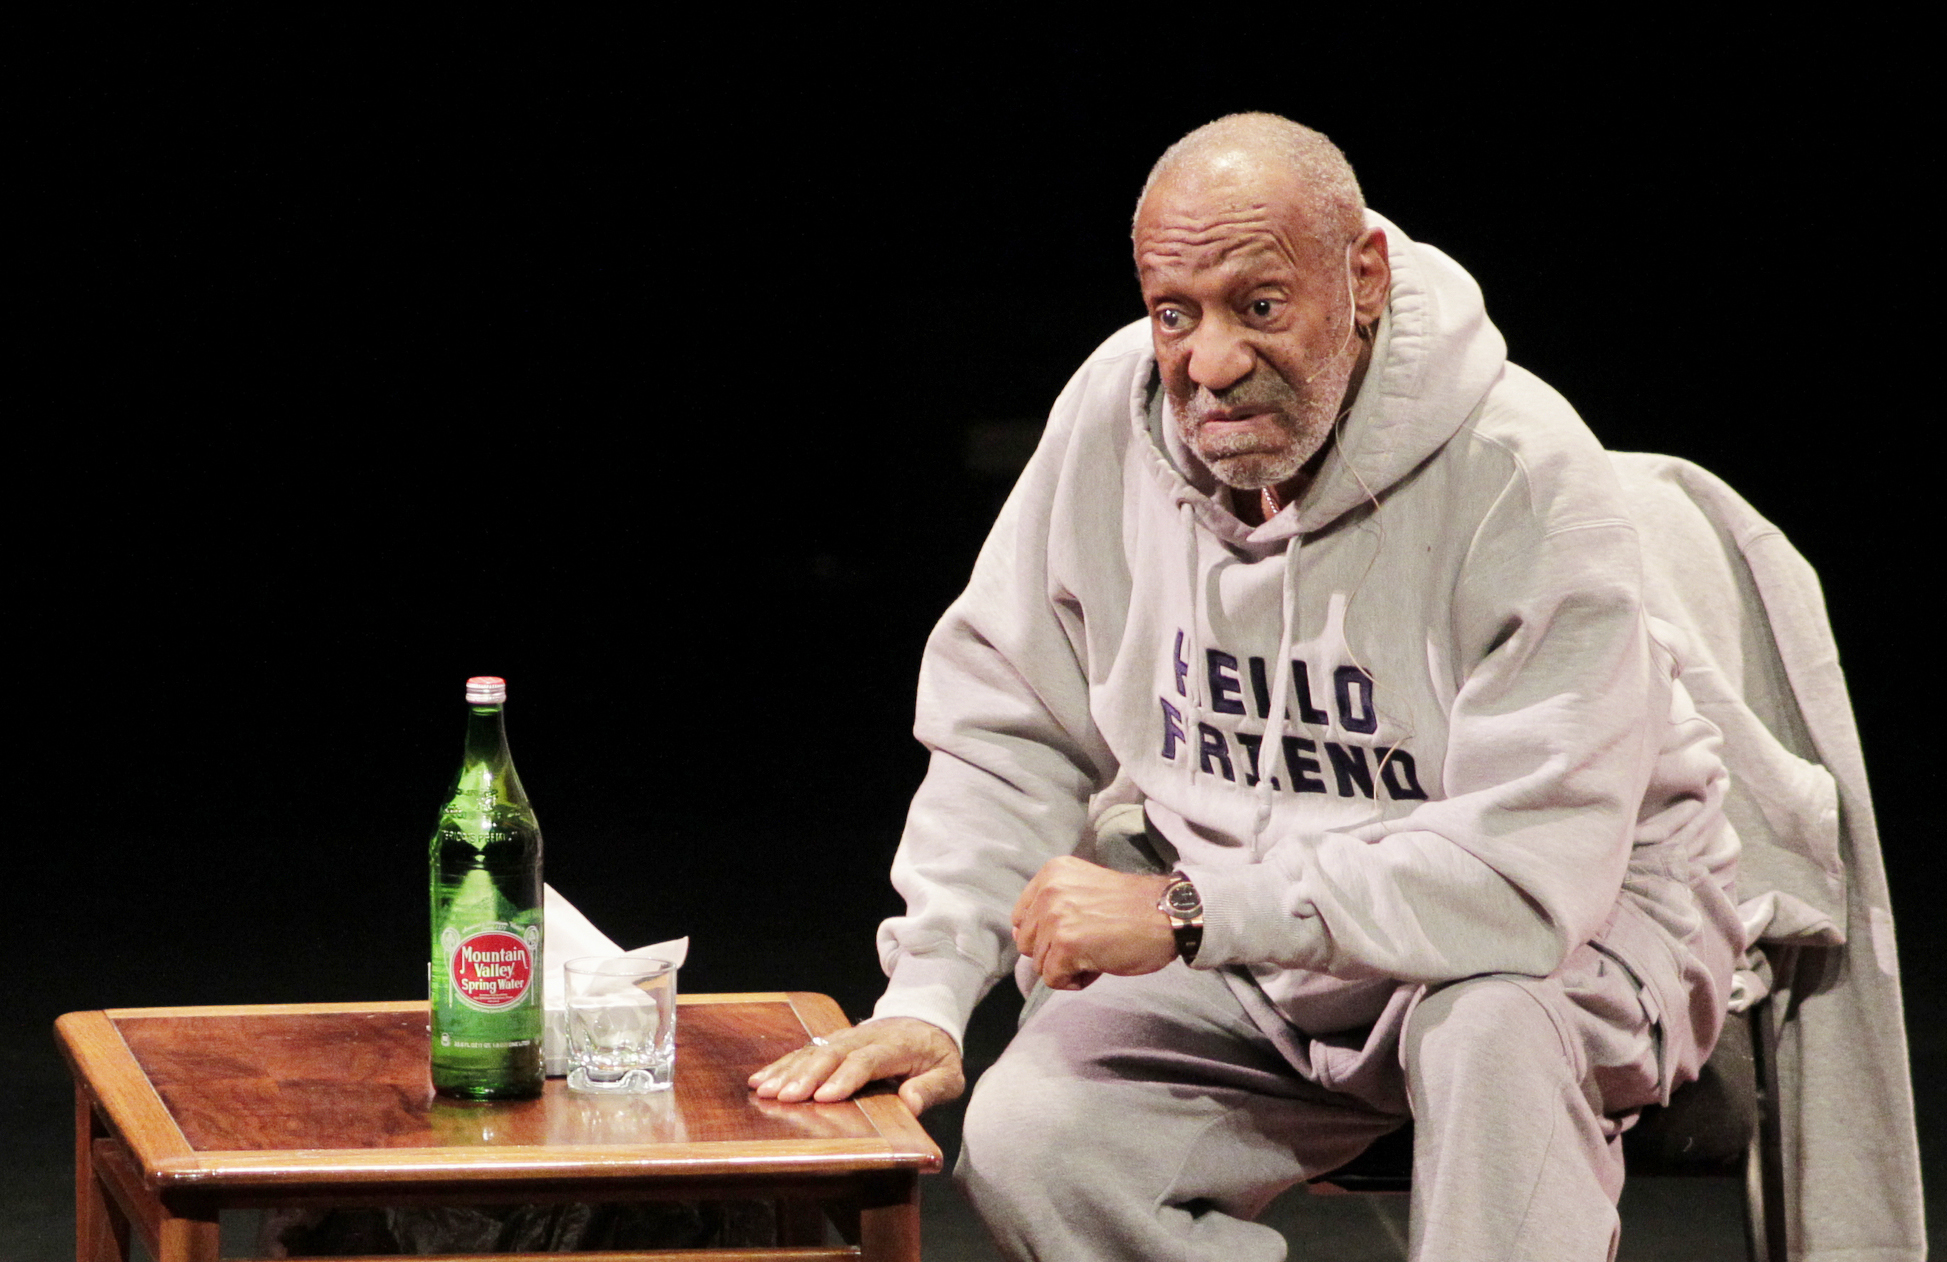 Comedian Bill Cosby performs at The Temple Buell Theatre in Denver, Colo. on Jan. 17, 2015.